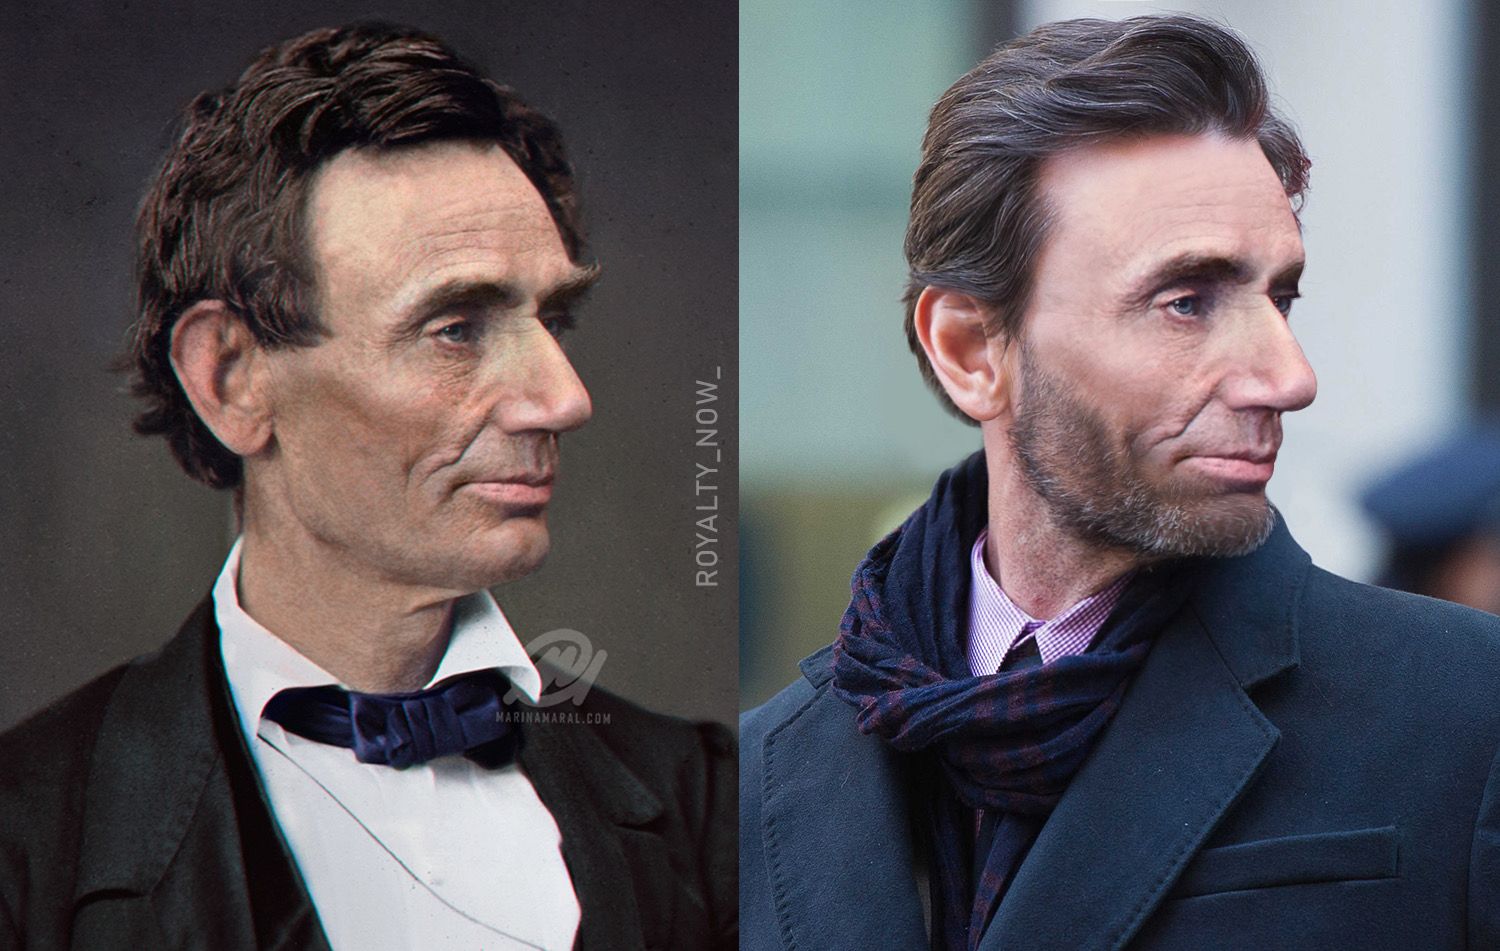 have-you-ever-imagined-what-iconic-historical-figures-would-look-like-today